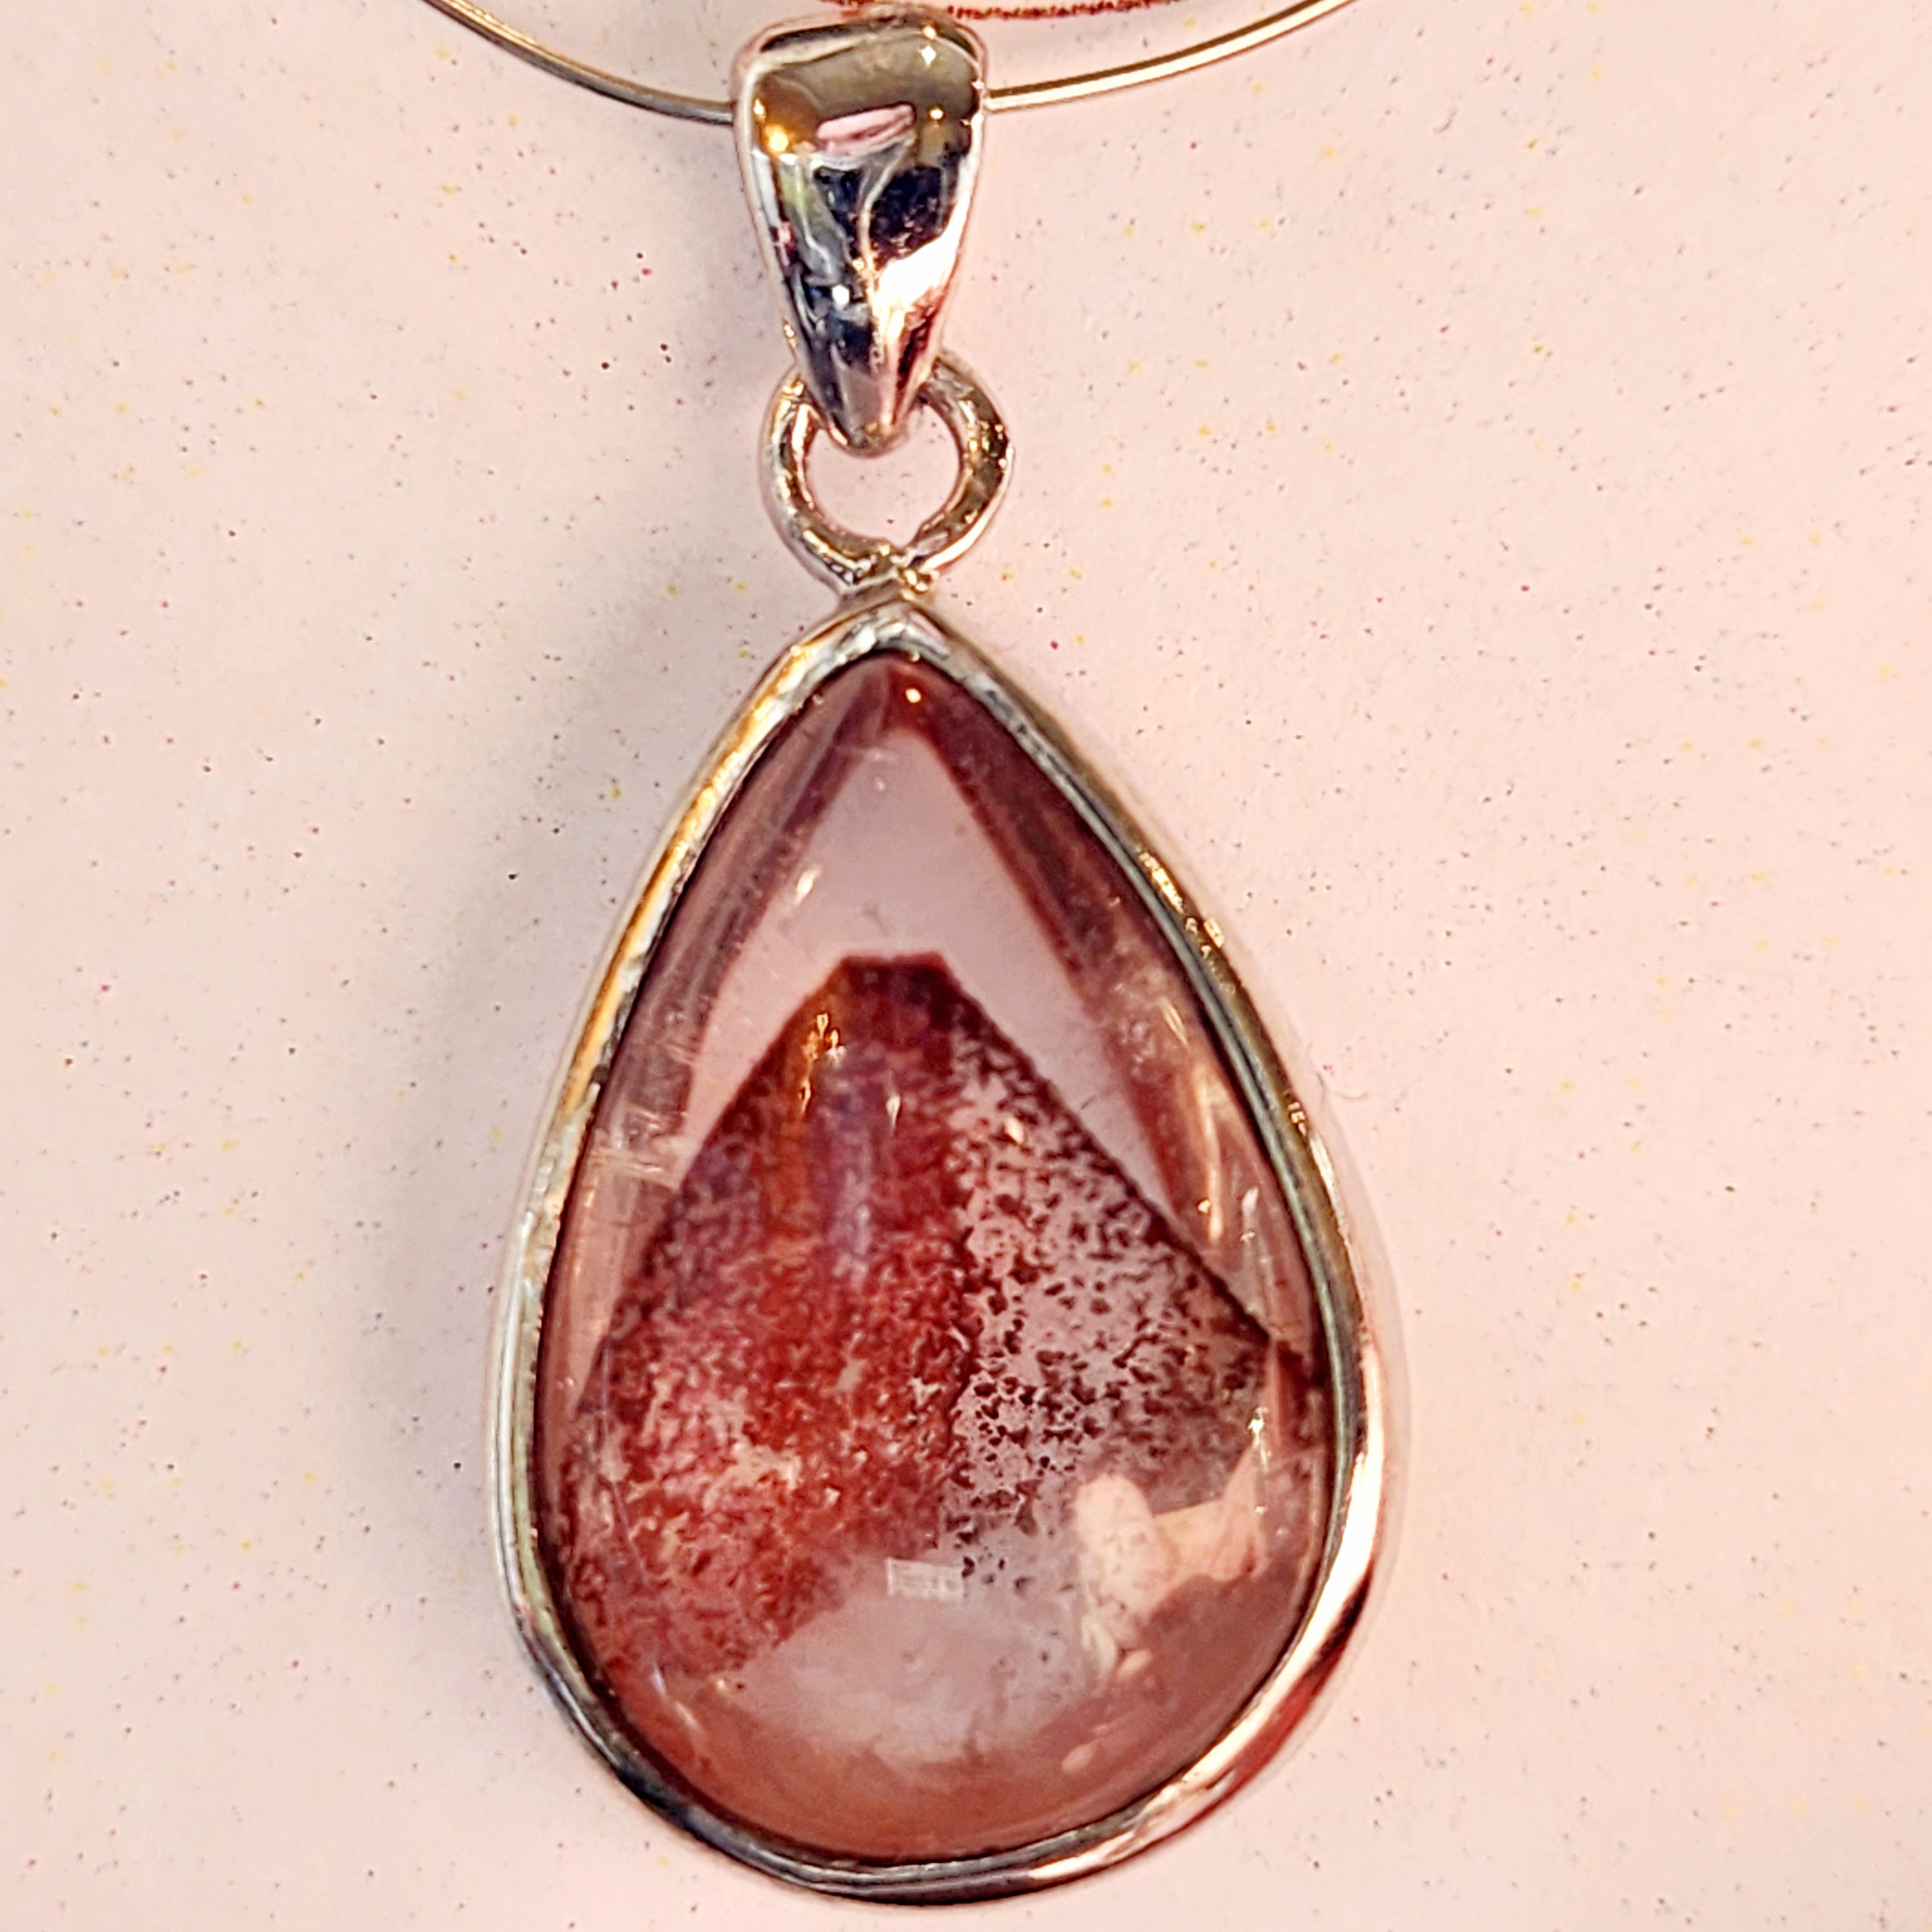 Lepidocrocite Phantom in Quartz Pendant .925 Silver for Healthy Relationships and Opening your Heart to Love